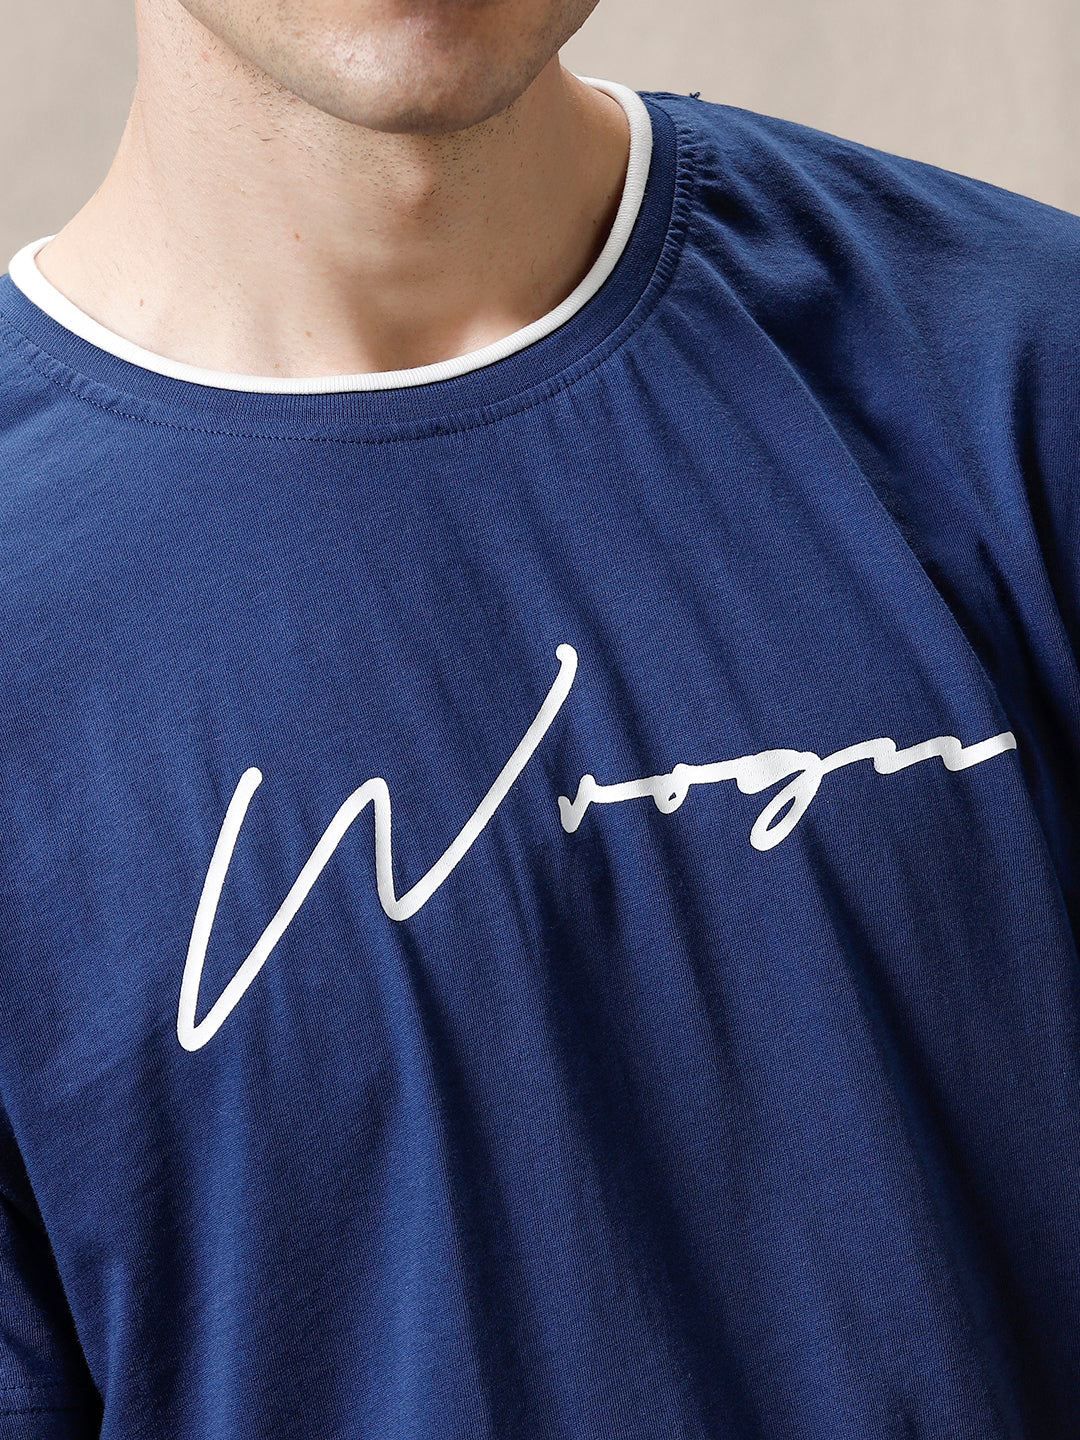 Blue Typography Printed T-Shirt